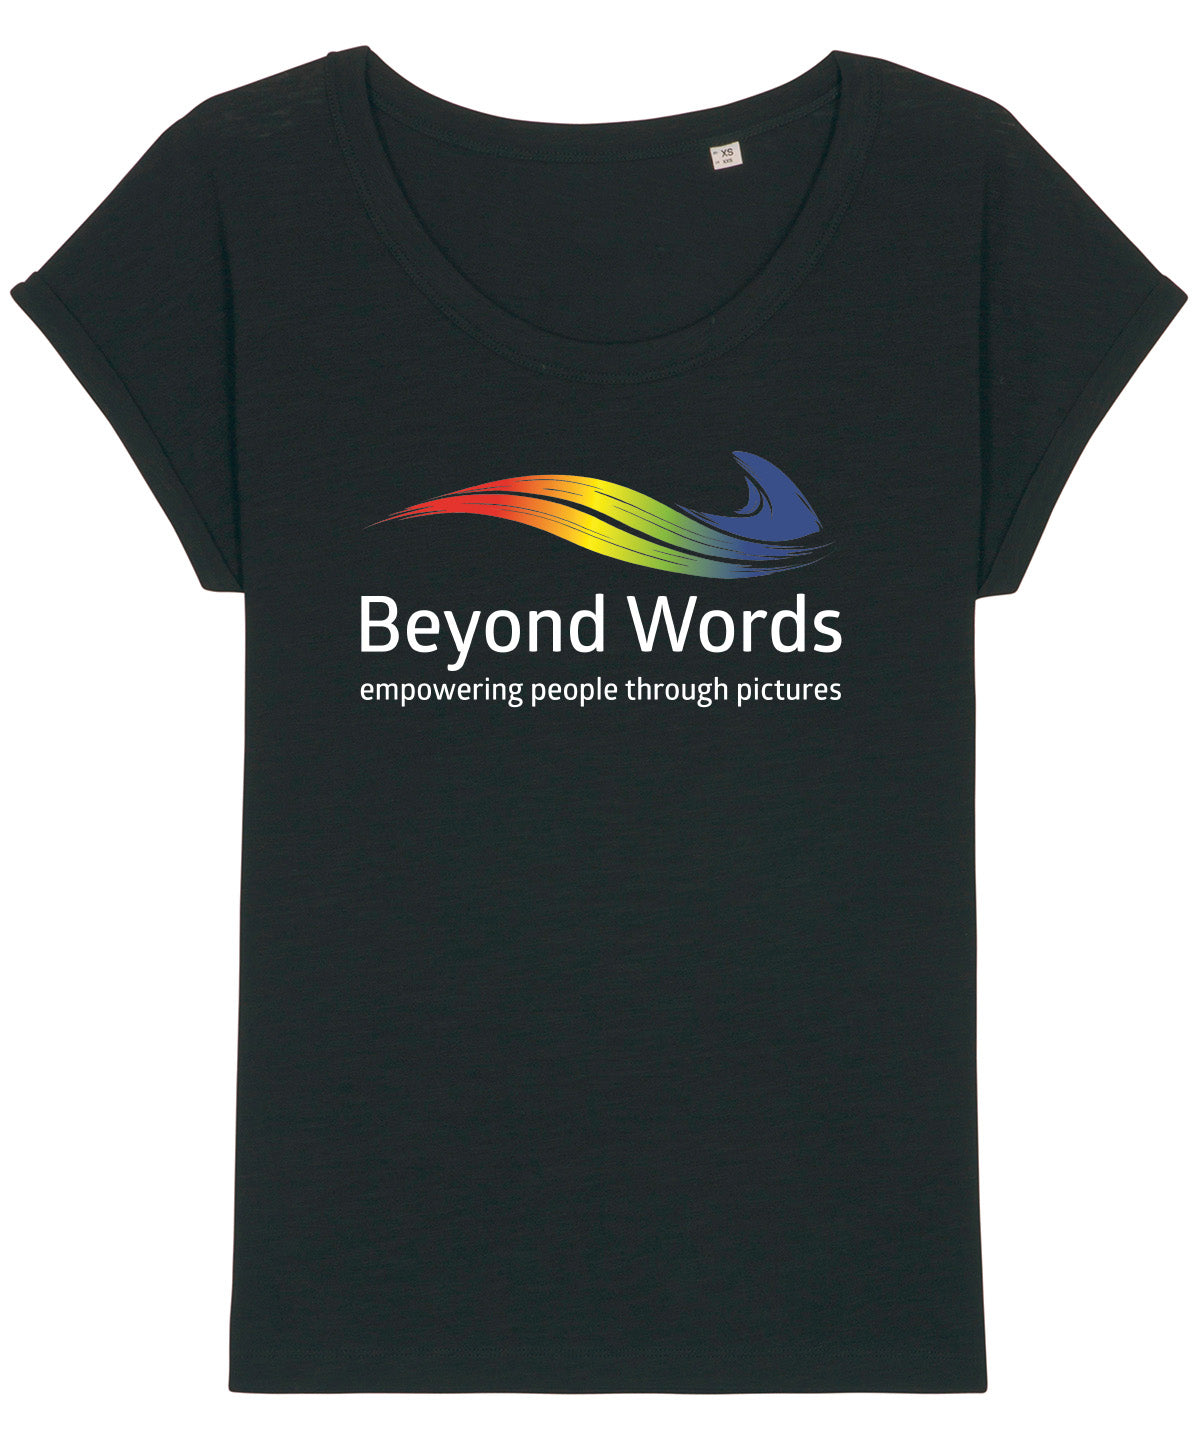 Women's Relaxed Fit T-shirt for Beyond Words